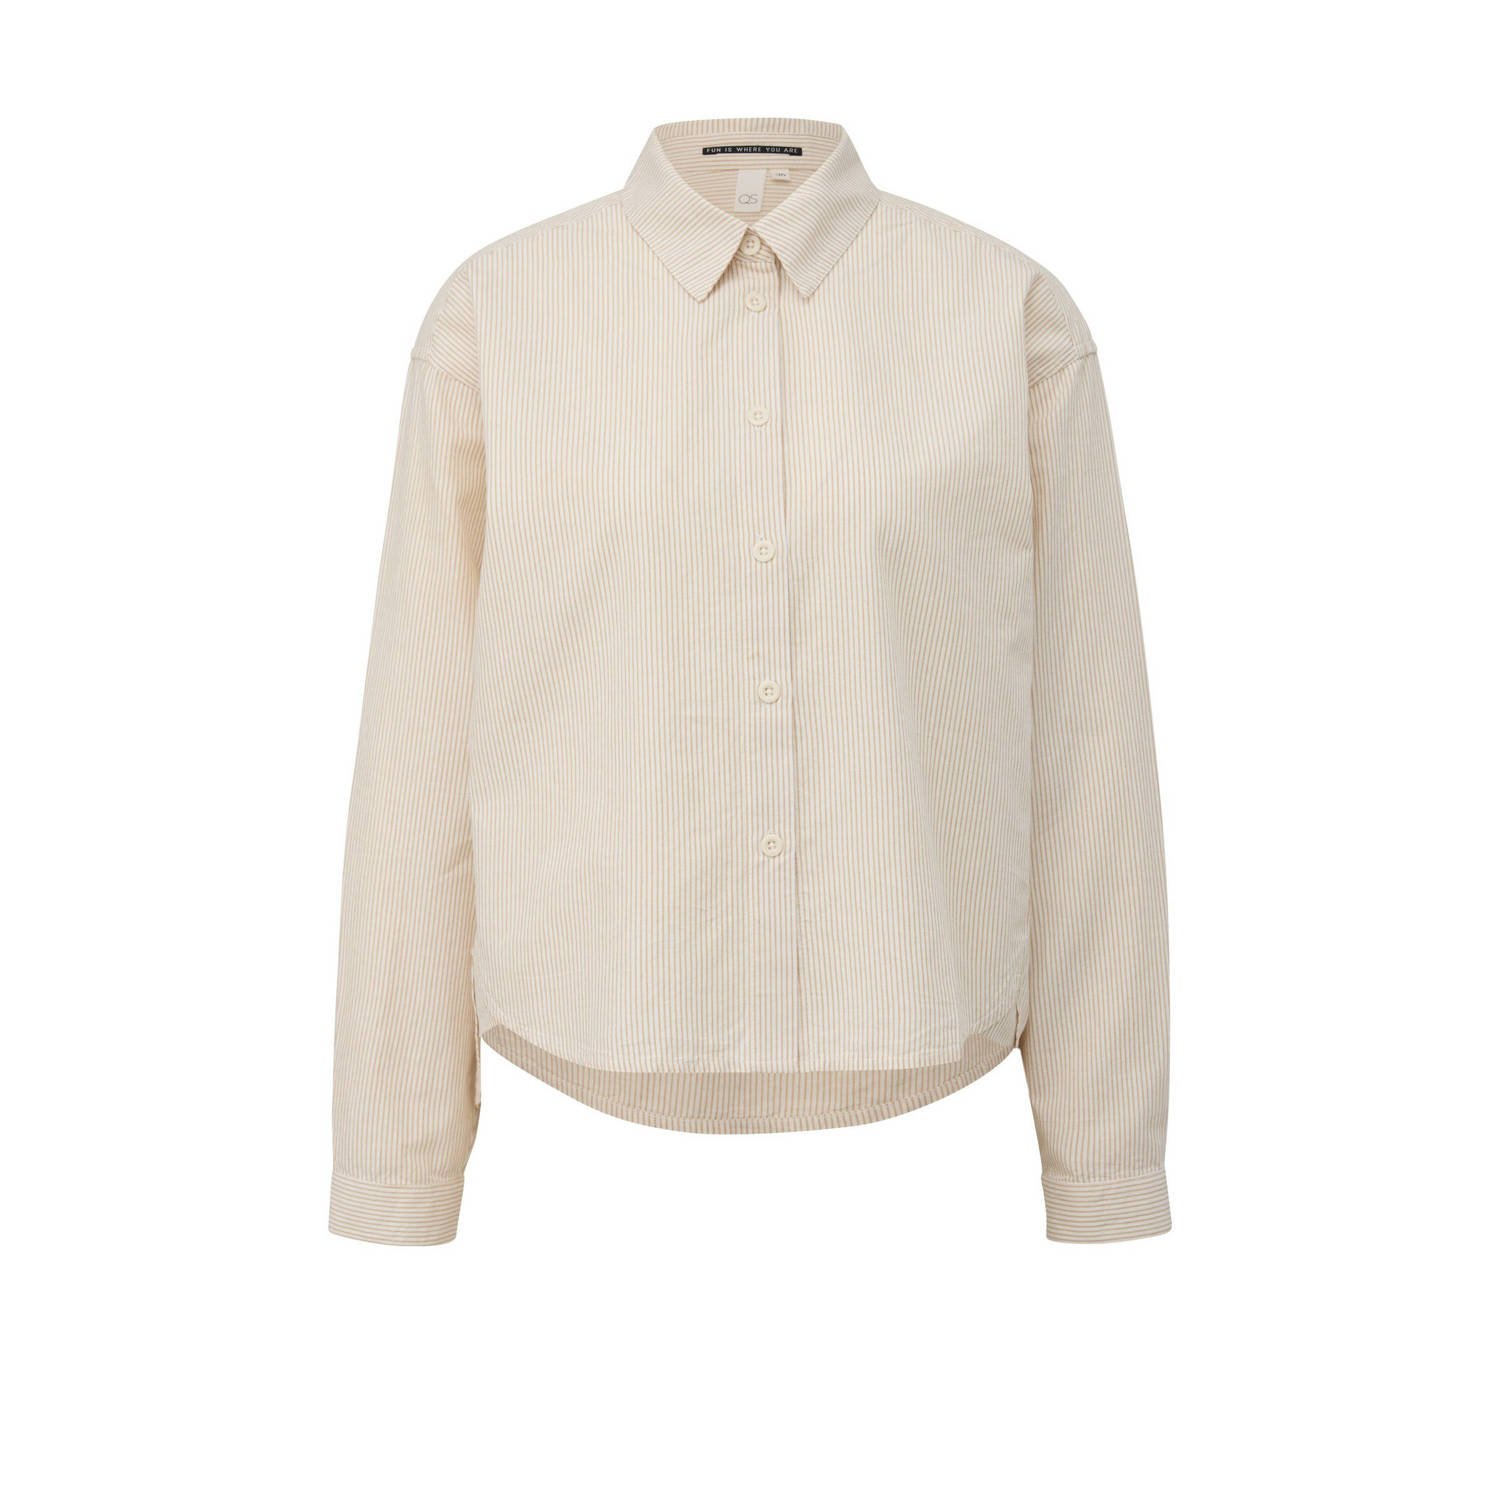 Q S by s.Oliver gestreepte blouse beige ecru